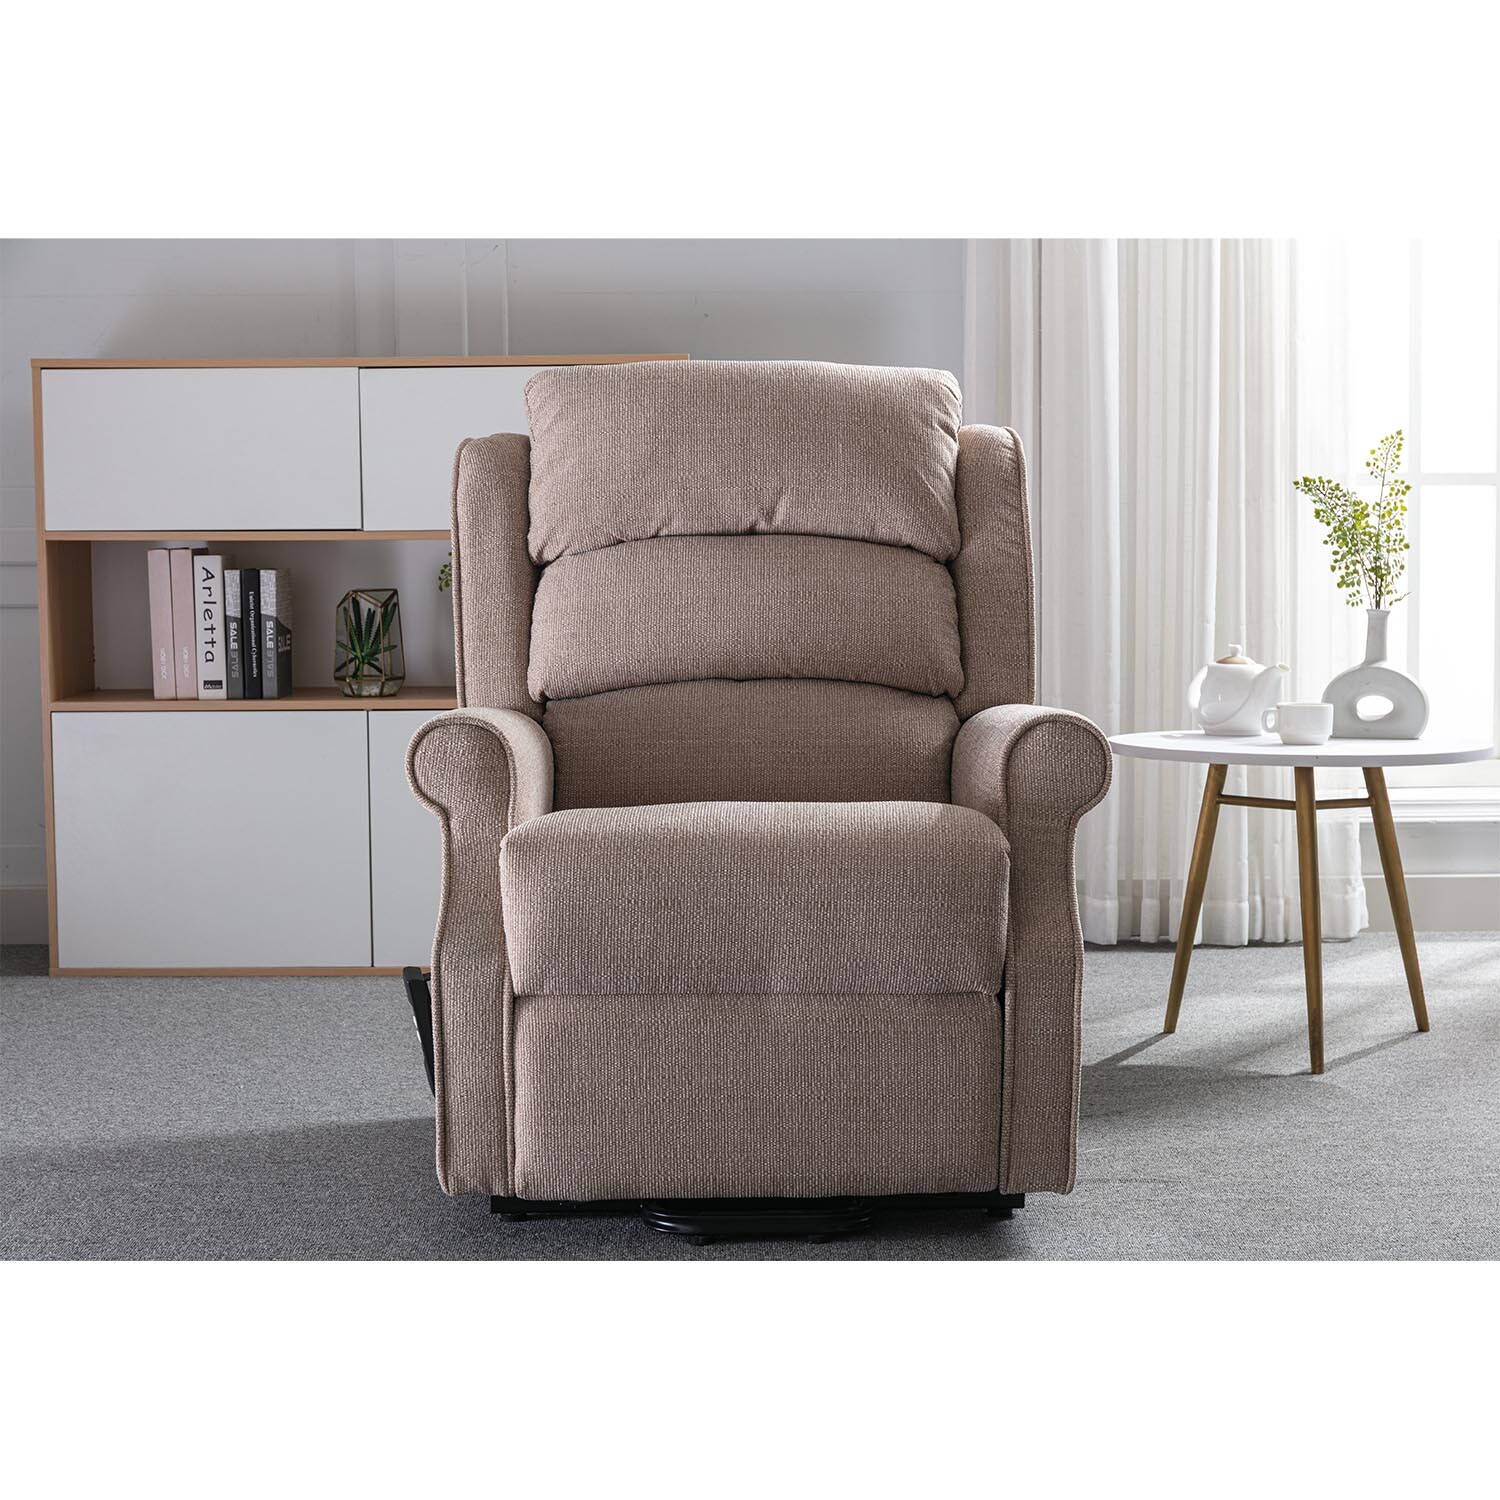 Winslow Neutral Wheat Fabric Rise Recliner Chair Image 2